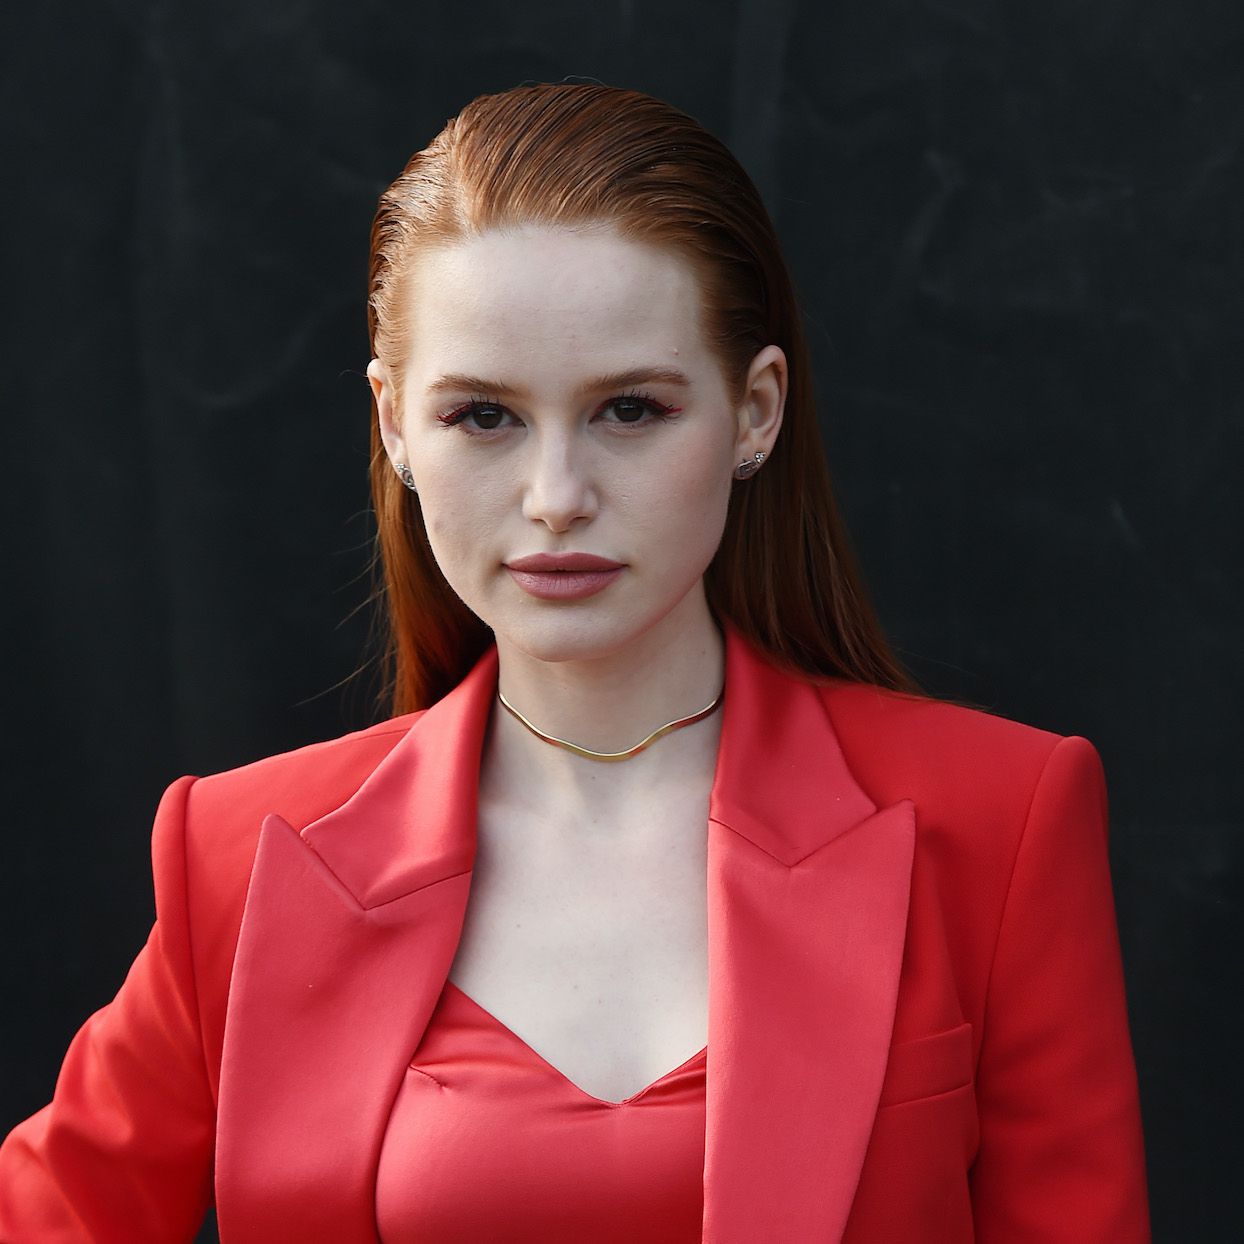 Madelaine Petsch arrives at the Boss fashion show on February 23, 2020 in Milan, Italy